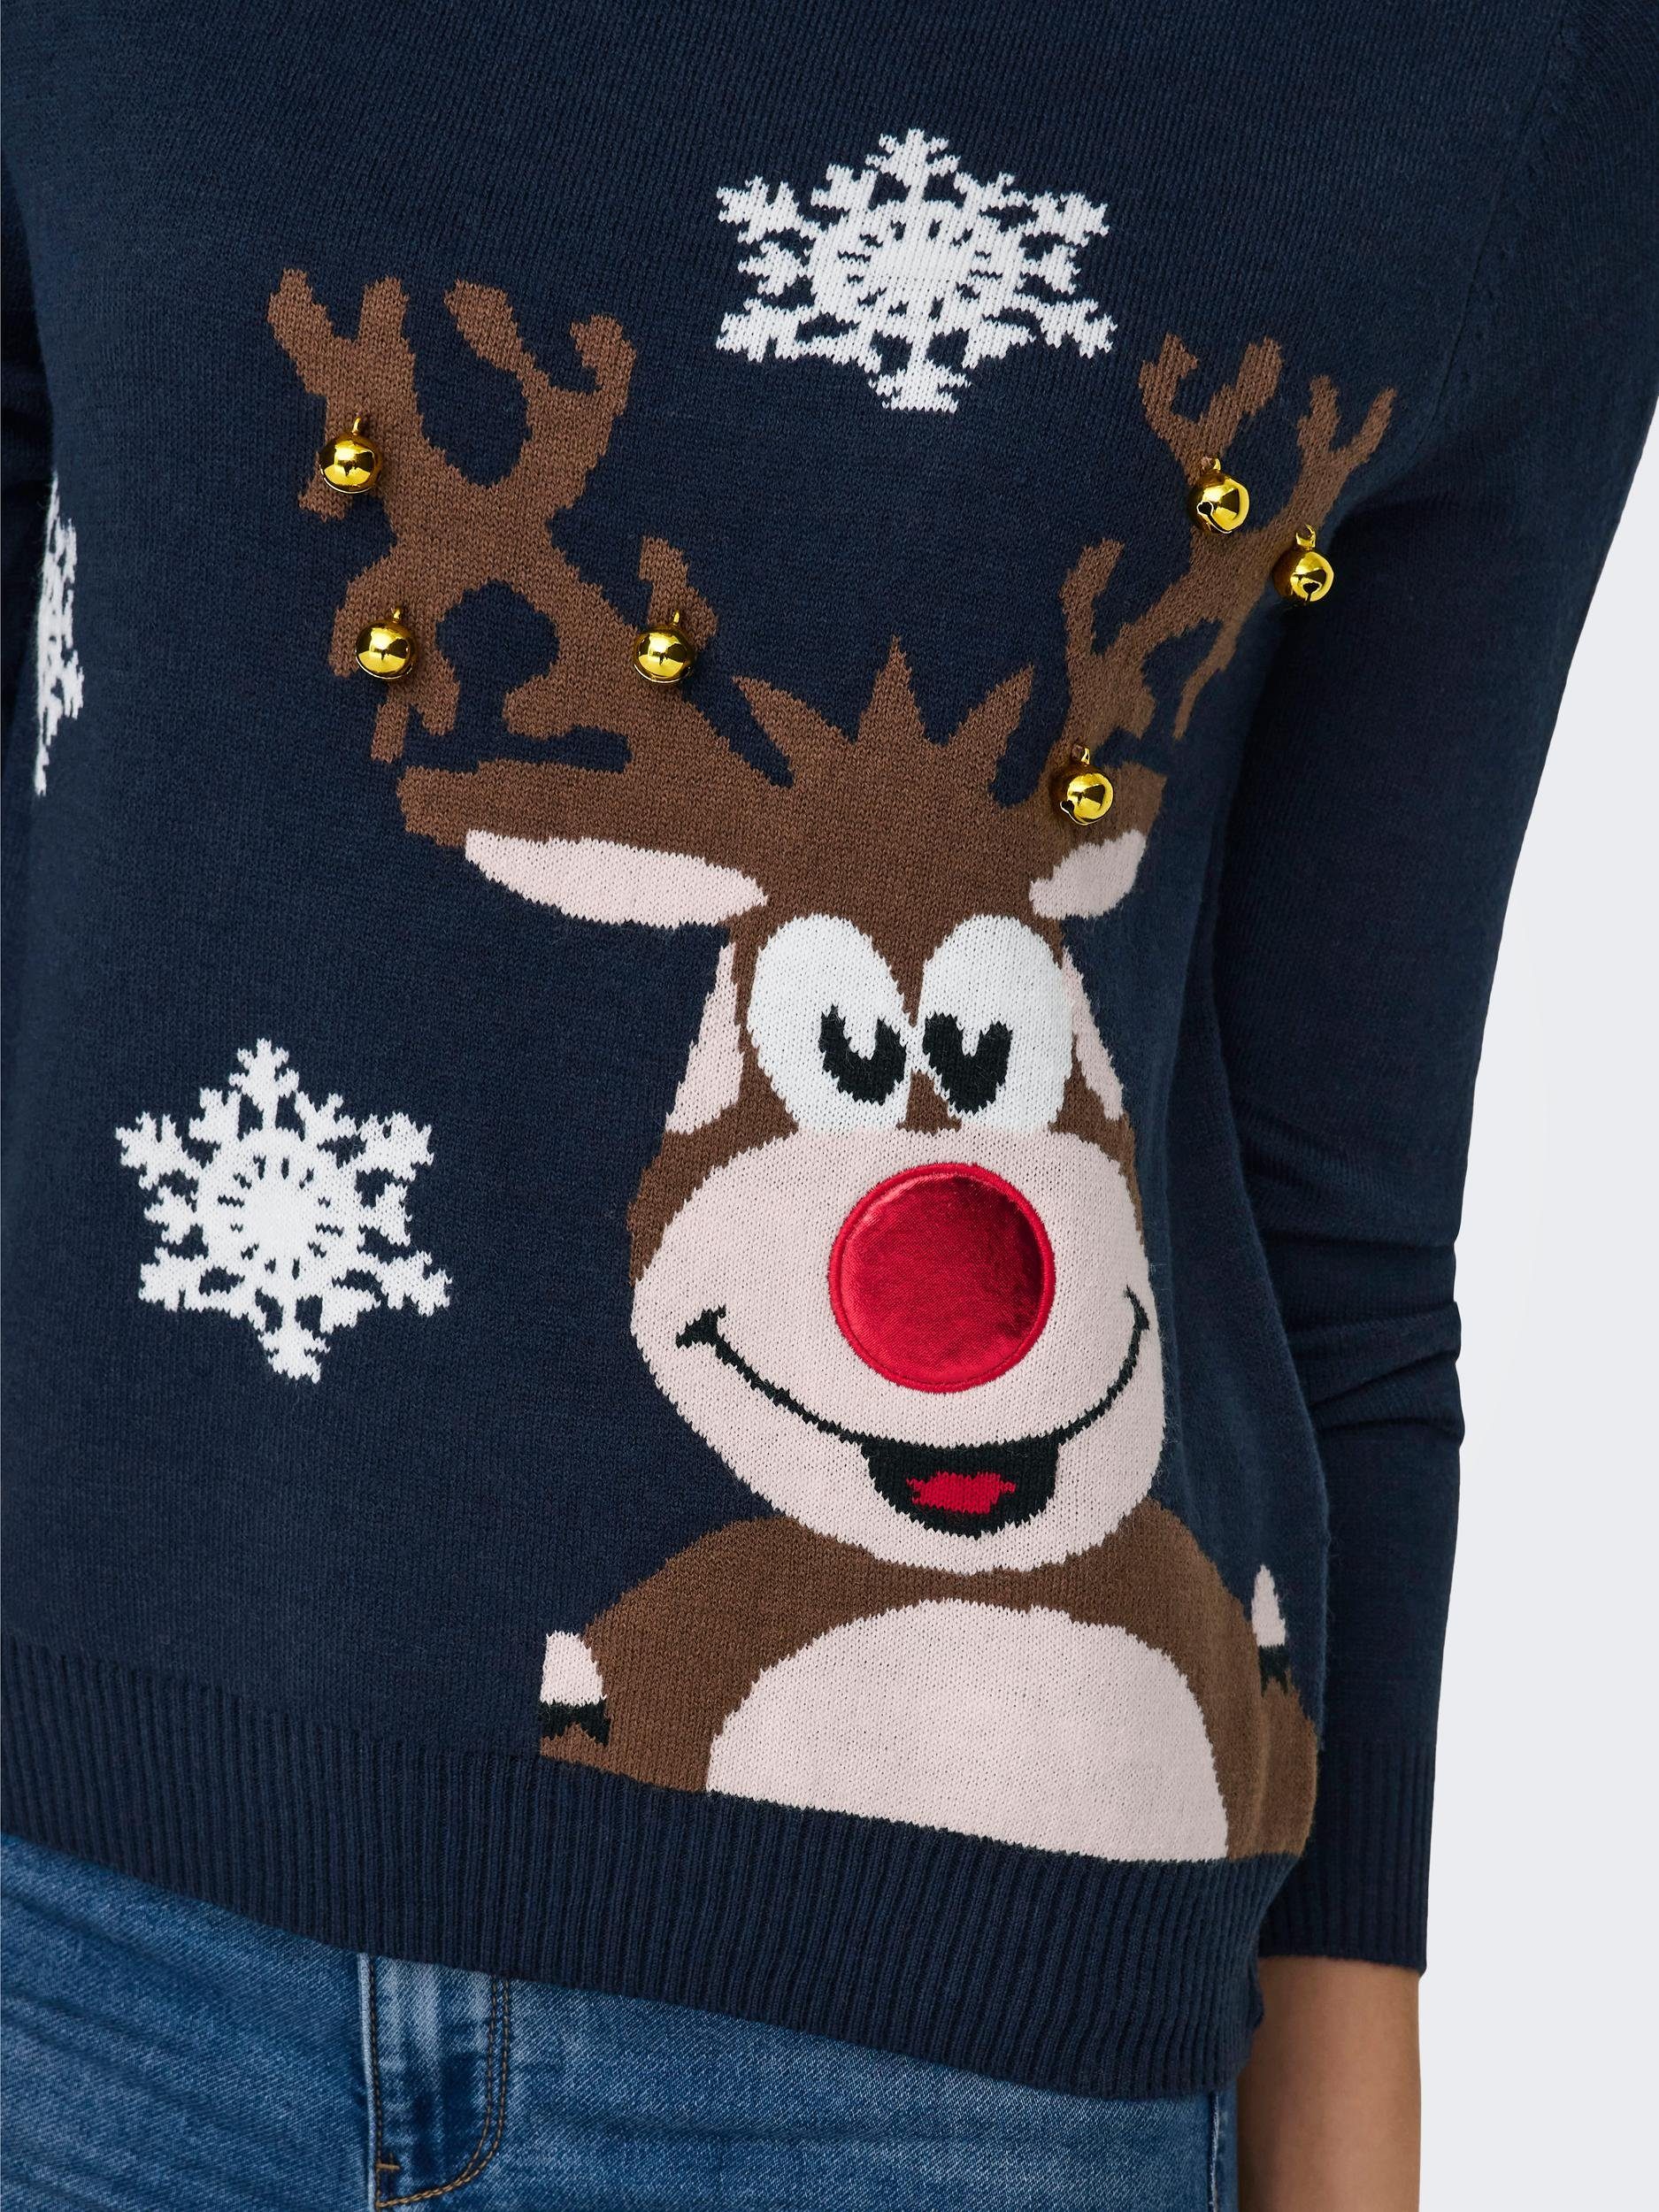 ONLY Detail:W. AND Sky PULLOVER Strickpullover DEER ONLXMAS L/S EX BELLS KNT BELL Night